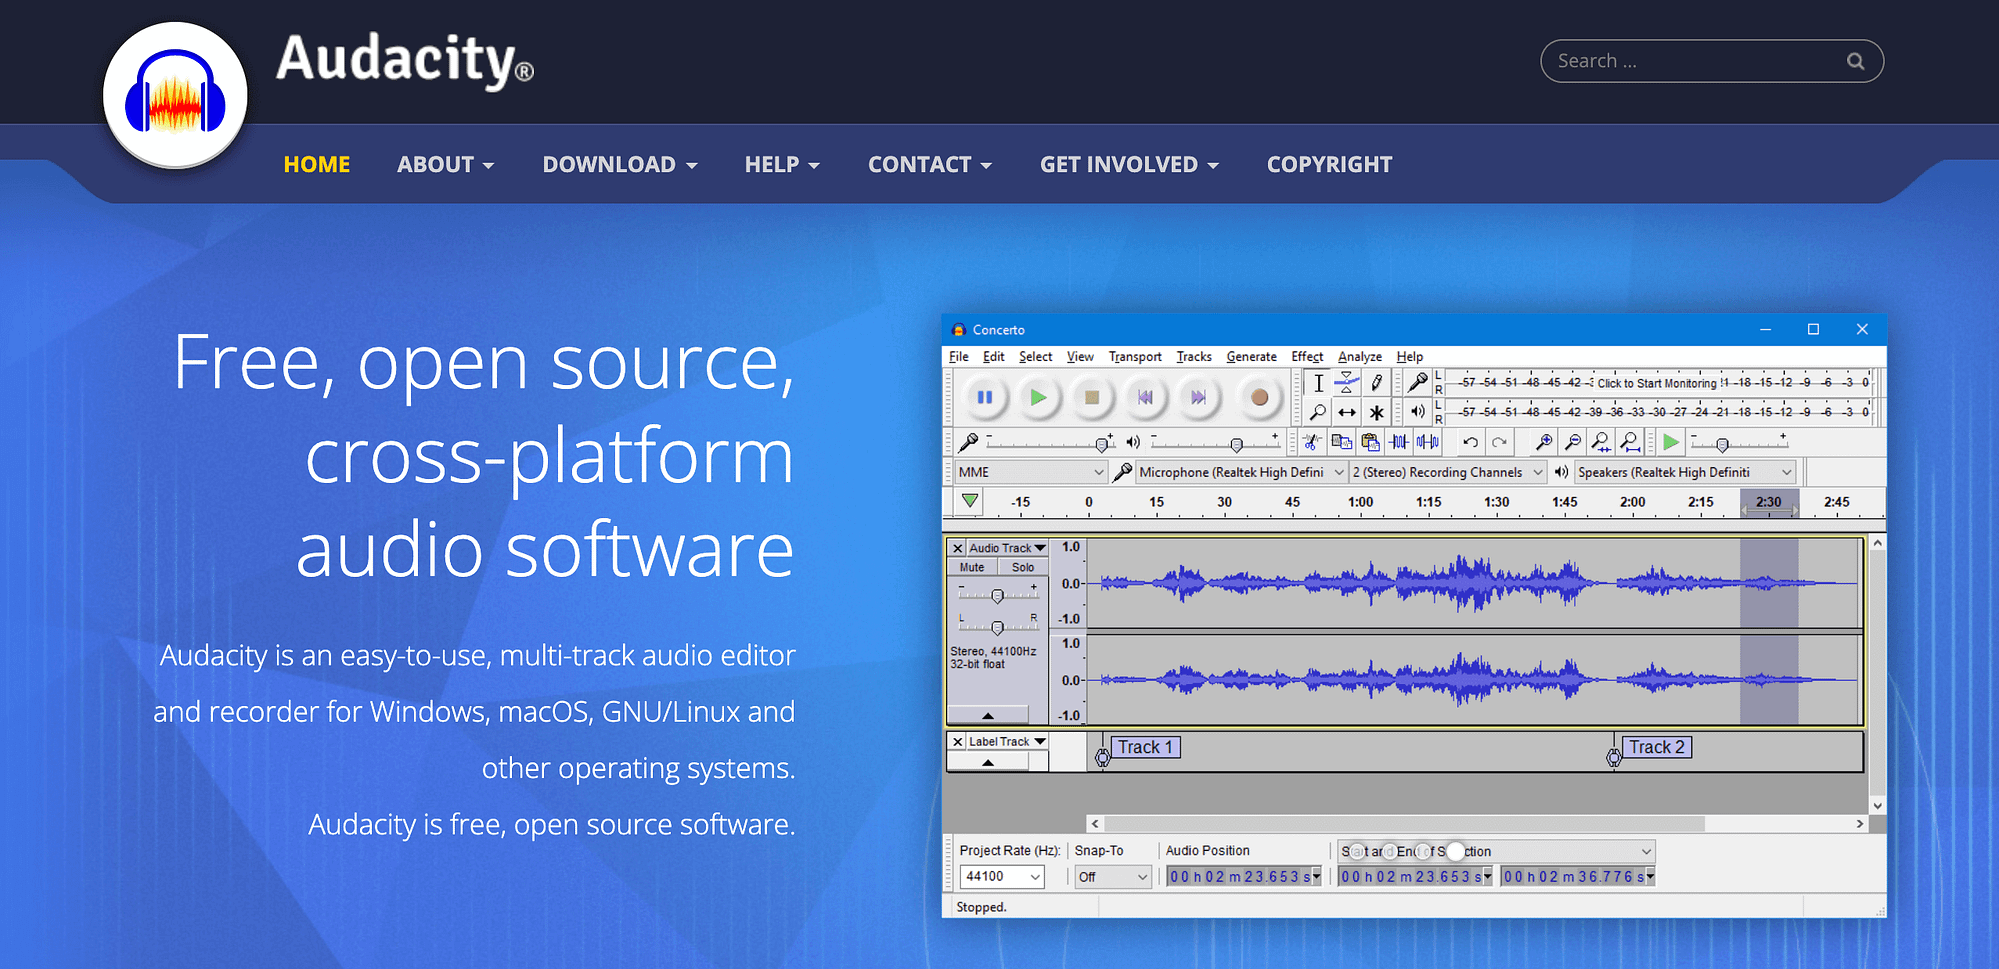 How to start a podcast for free, using open source software.